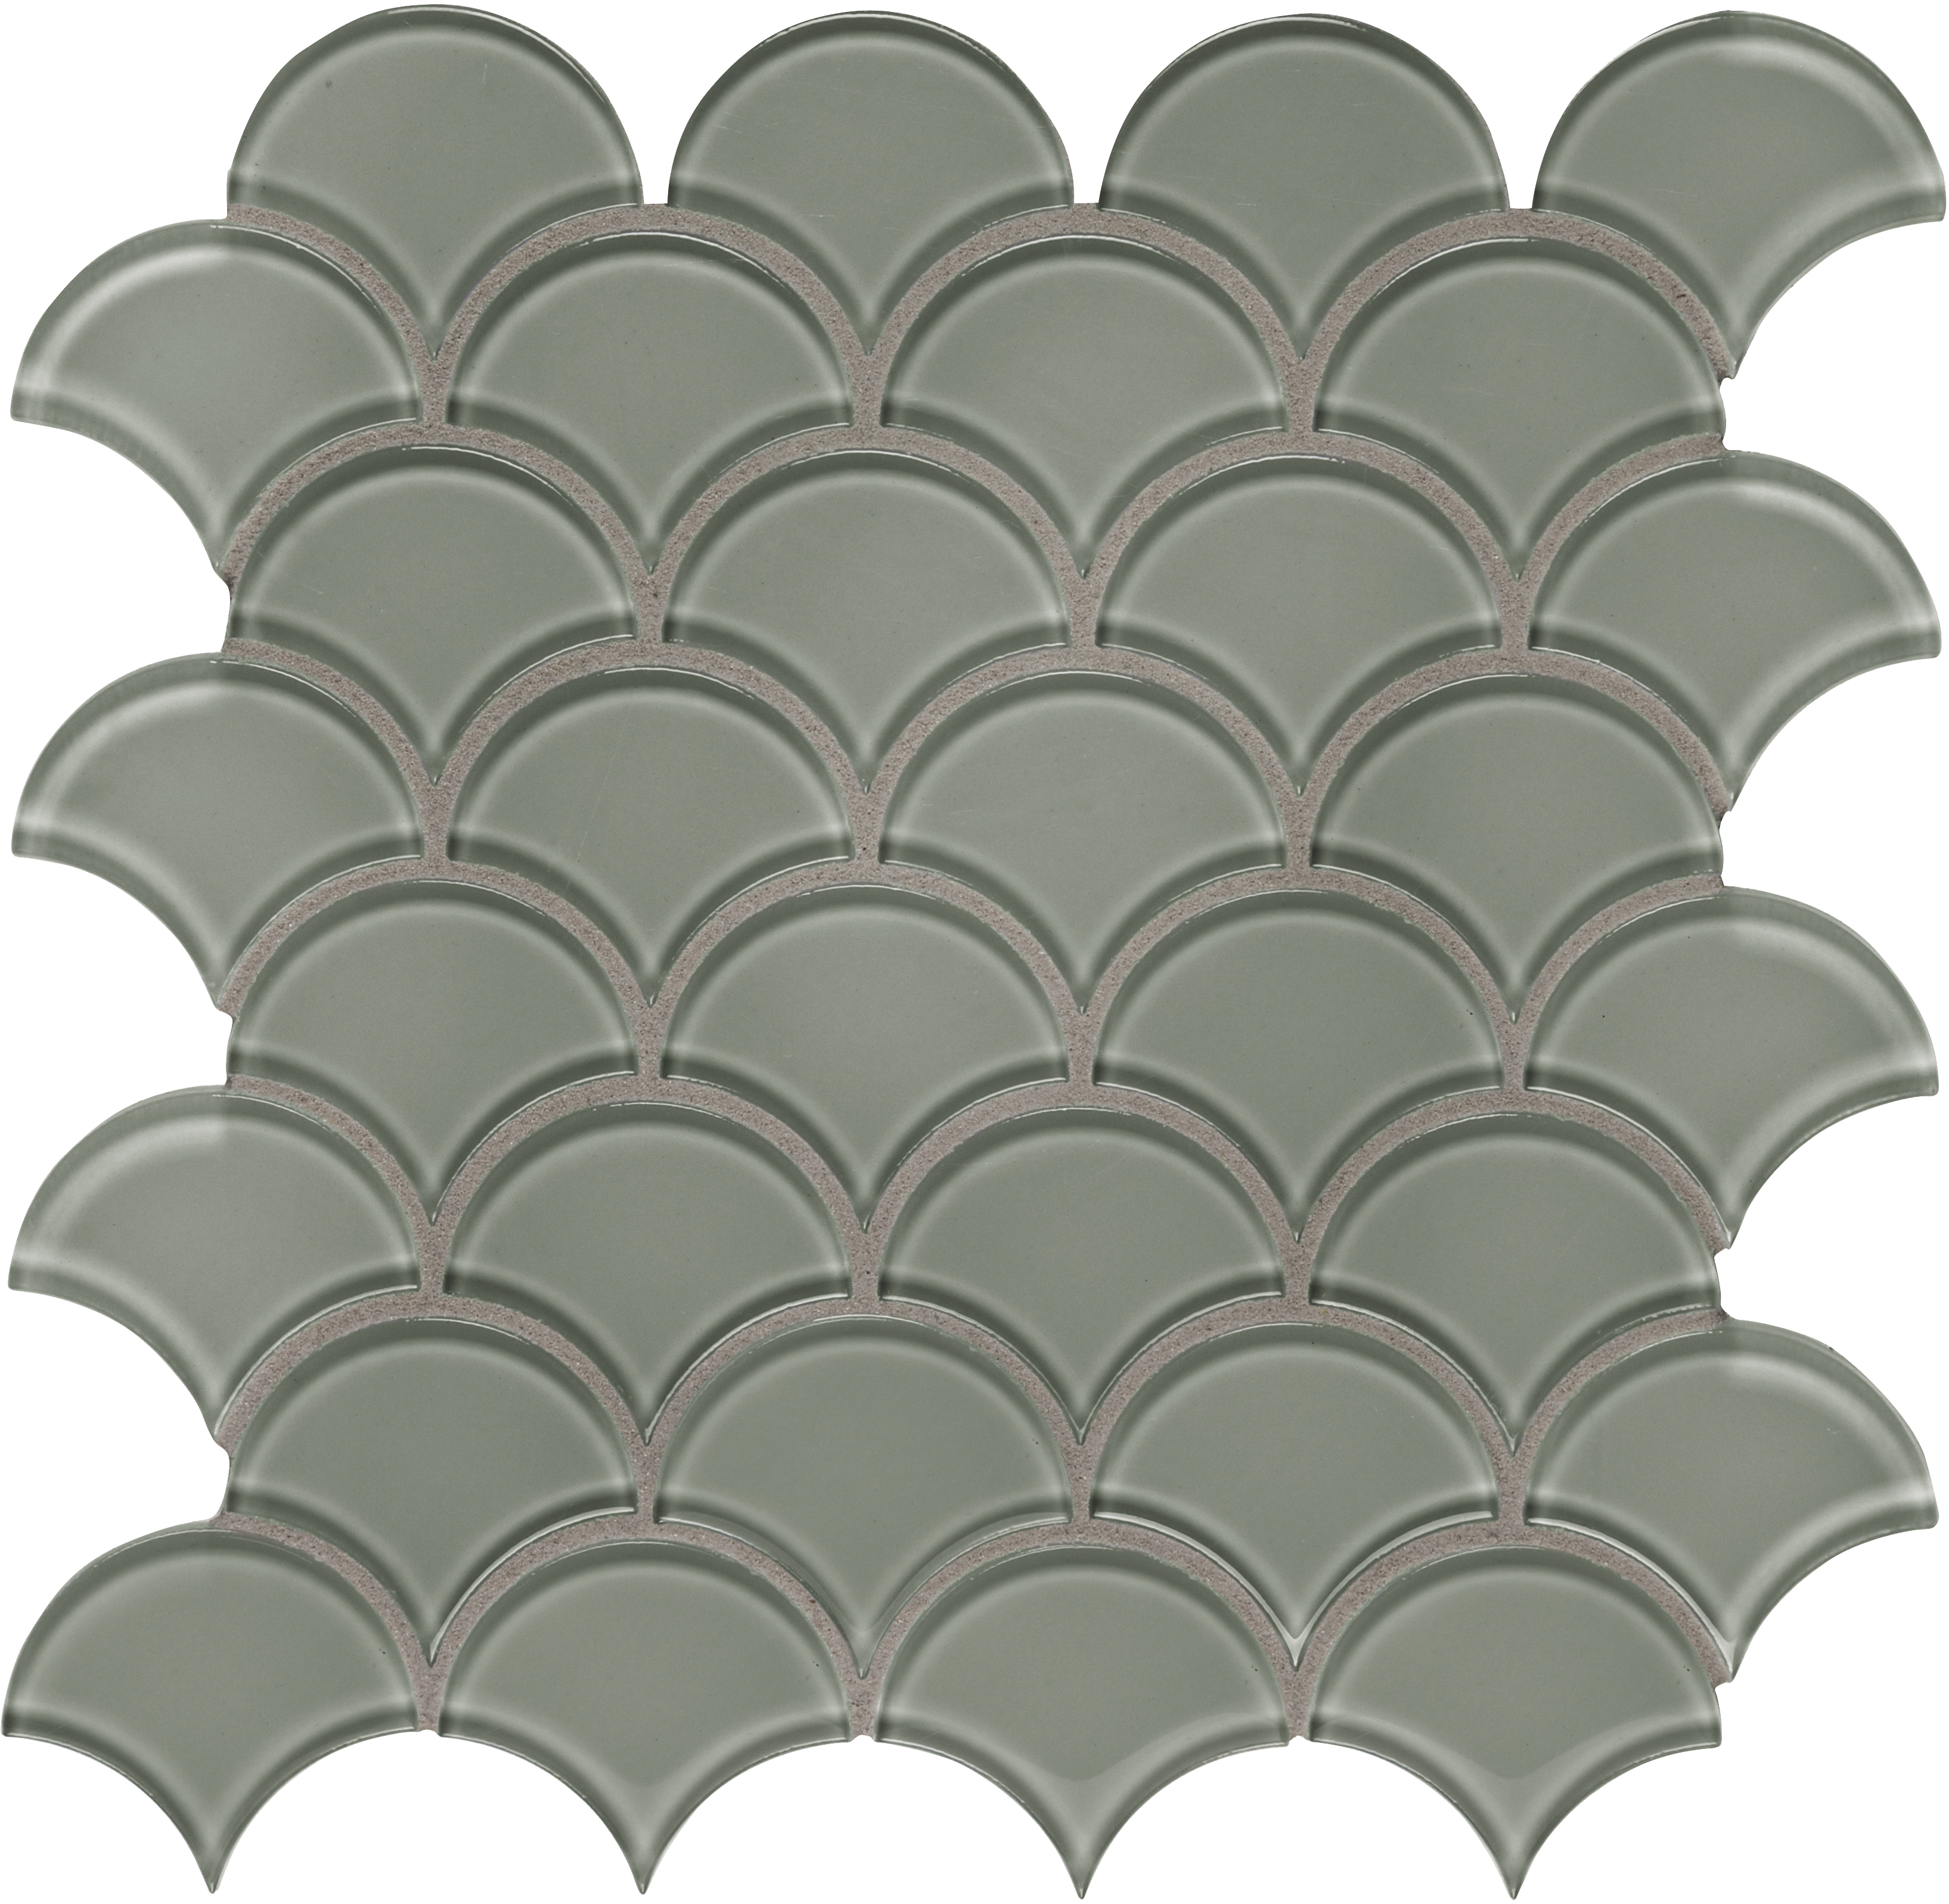 Specialty Tile Elysium Scallop Mosaic